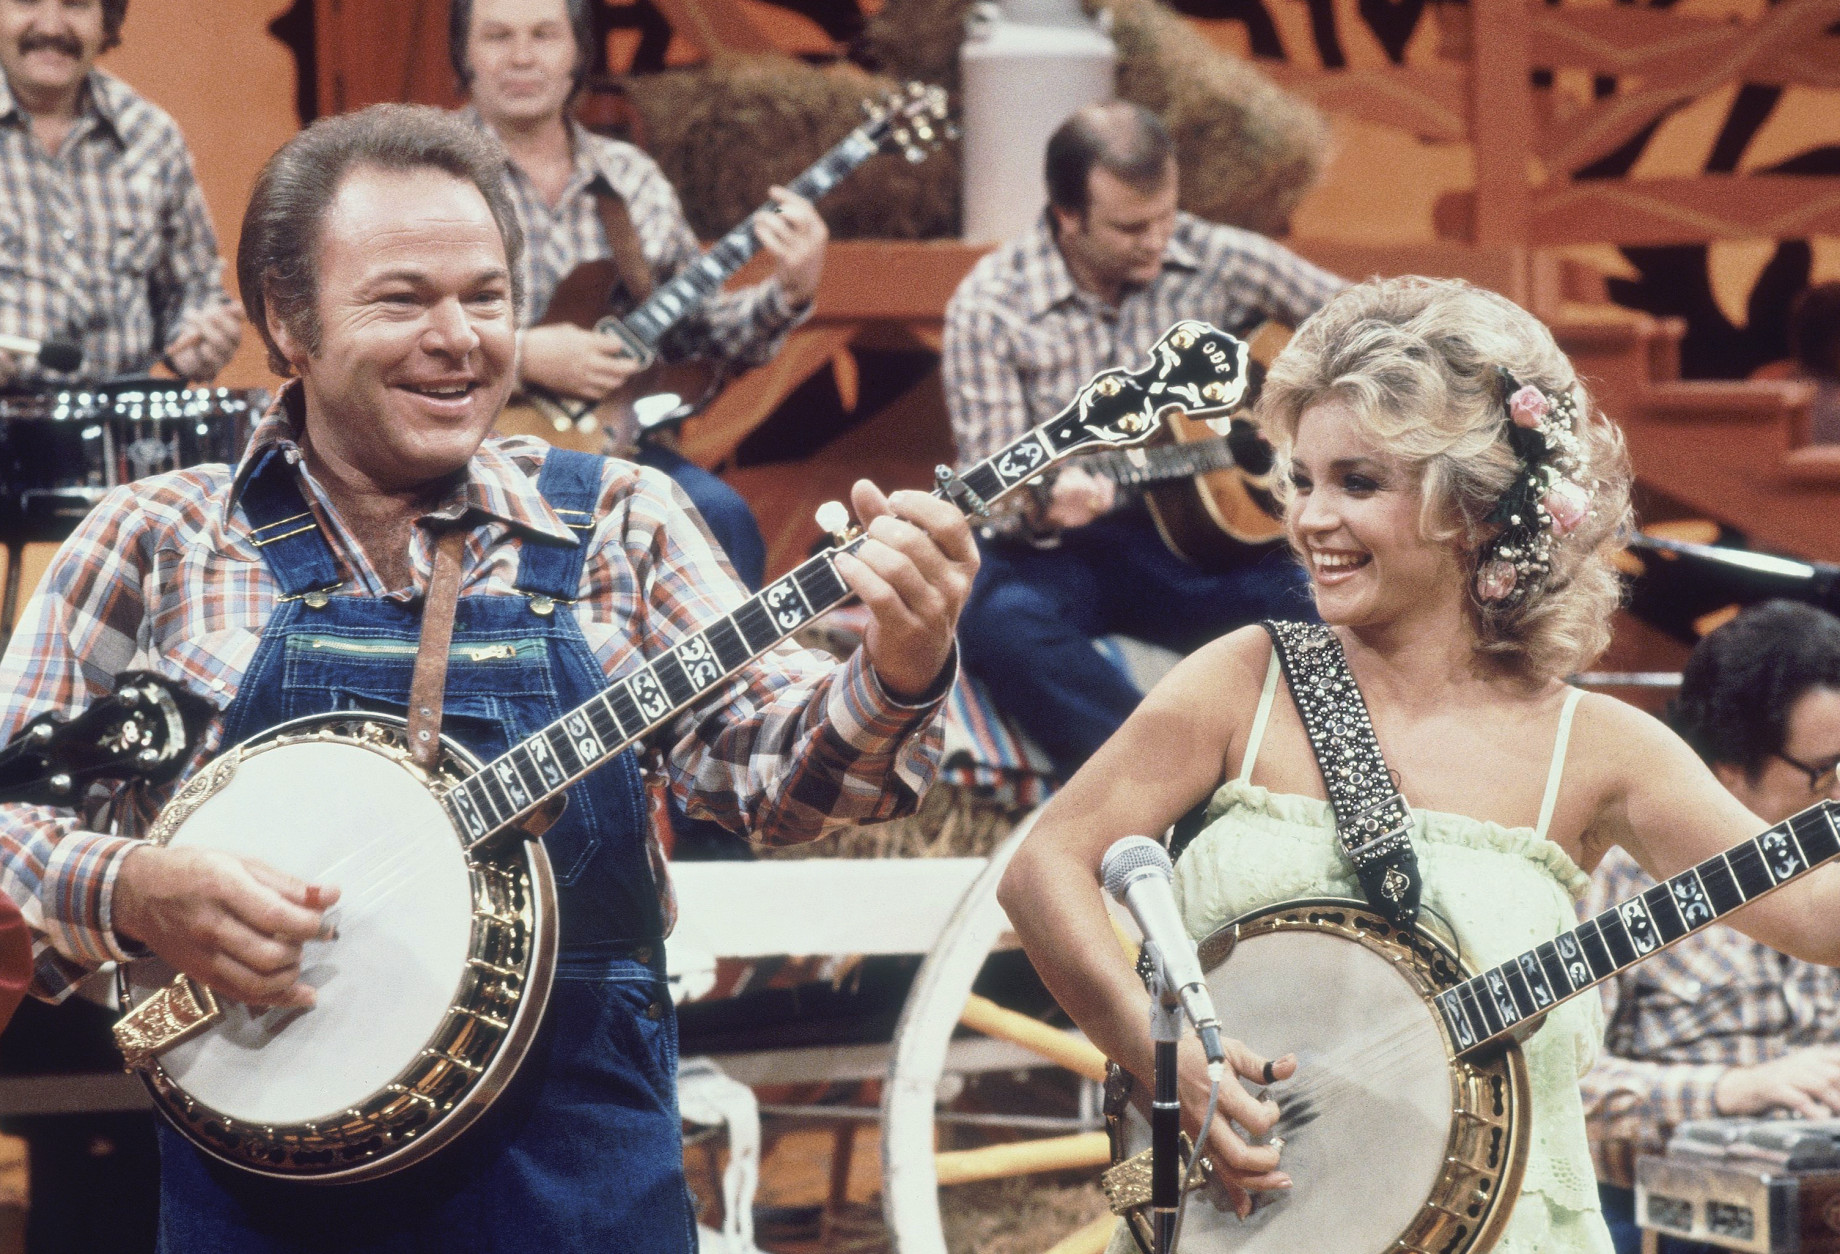 Country-western music stars Roy Clark and Barbara Mandrell perform together during the taping of a portion of a recent "Hee Haw" show in Nashville, 1978. (AP Photo)